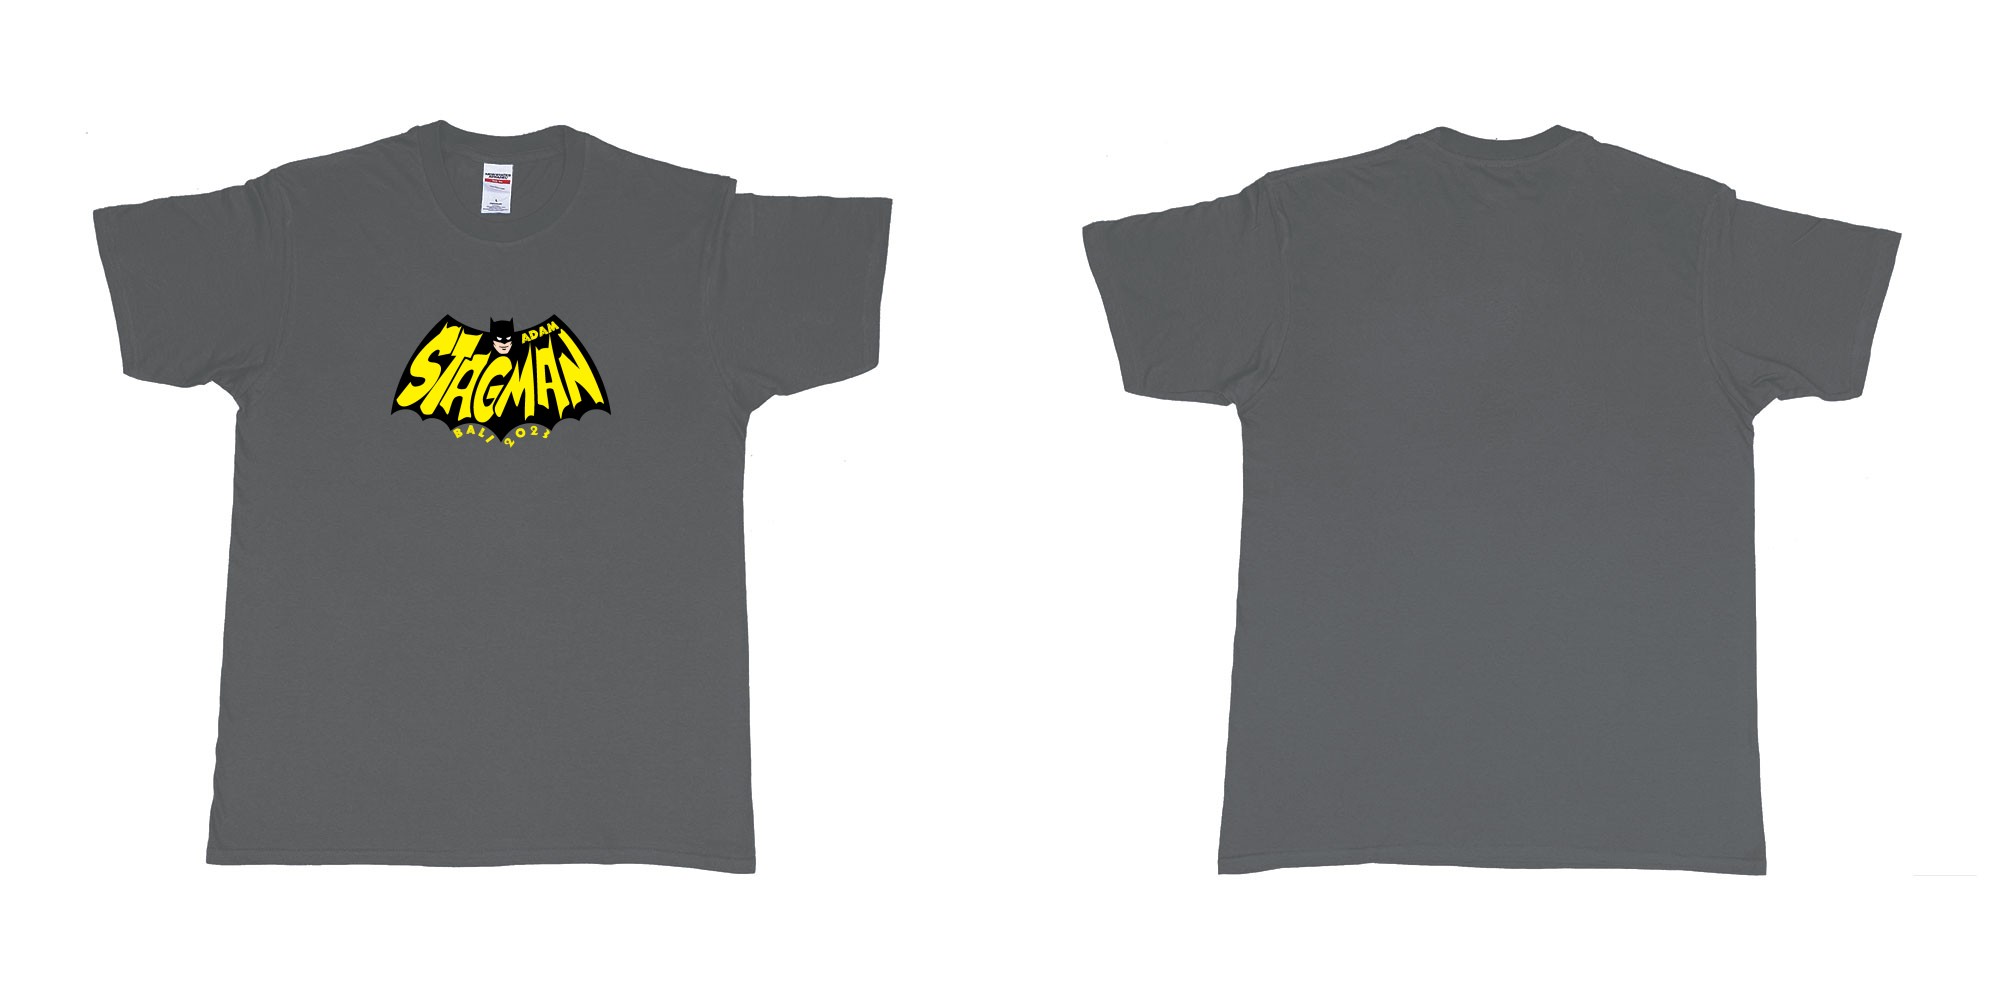 Custom tshirt design Batman StagMan Old School in fabric color charcoal choice your own text made in Bali by The Pirate Way